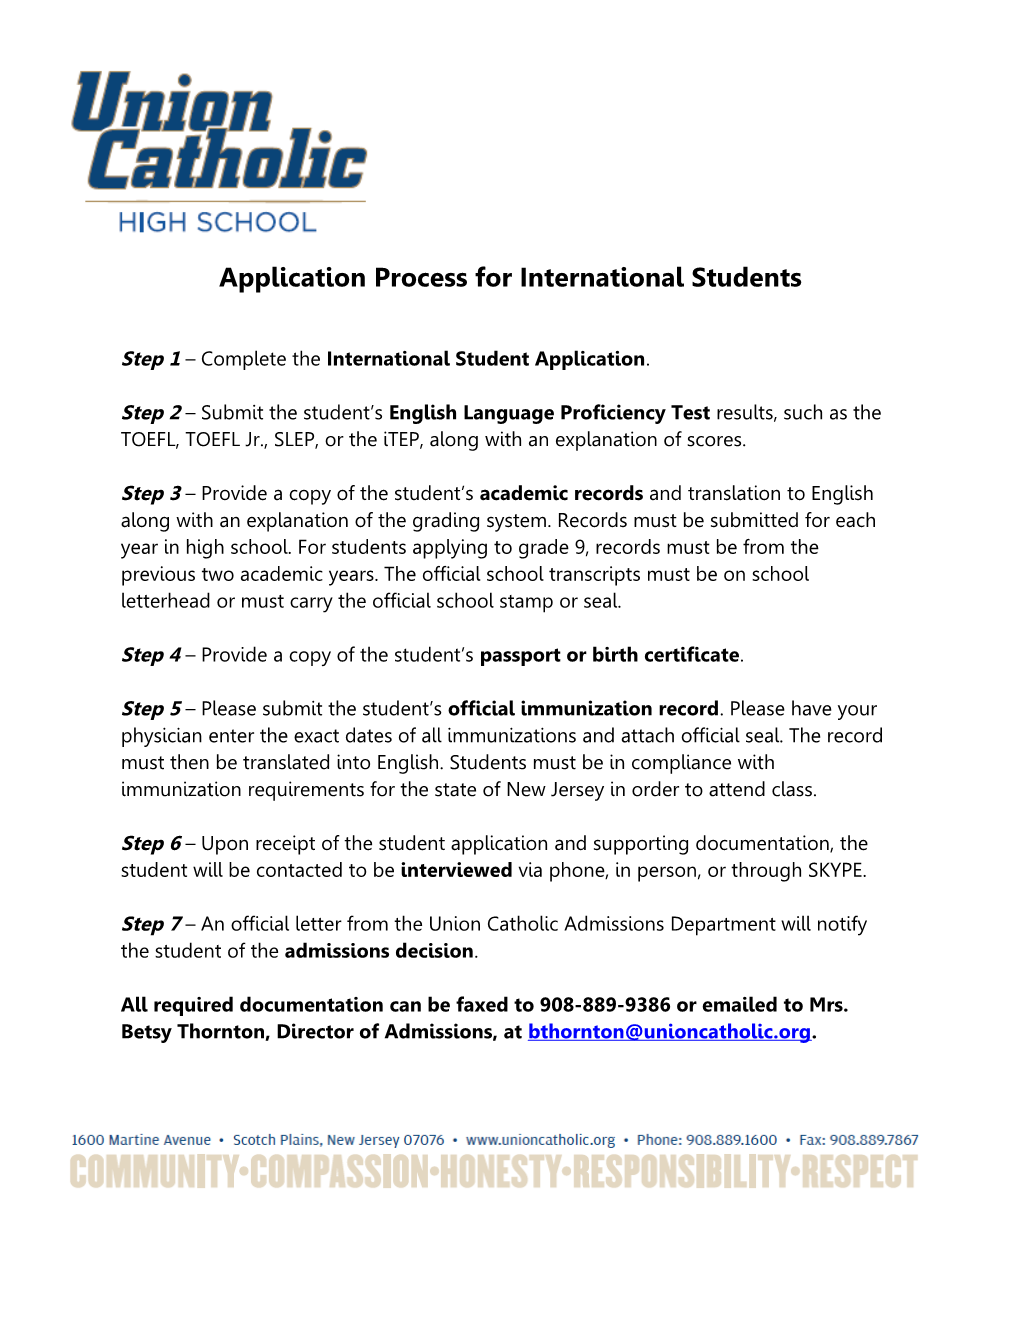 Appication for International Students